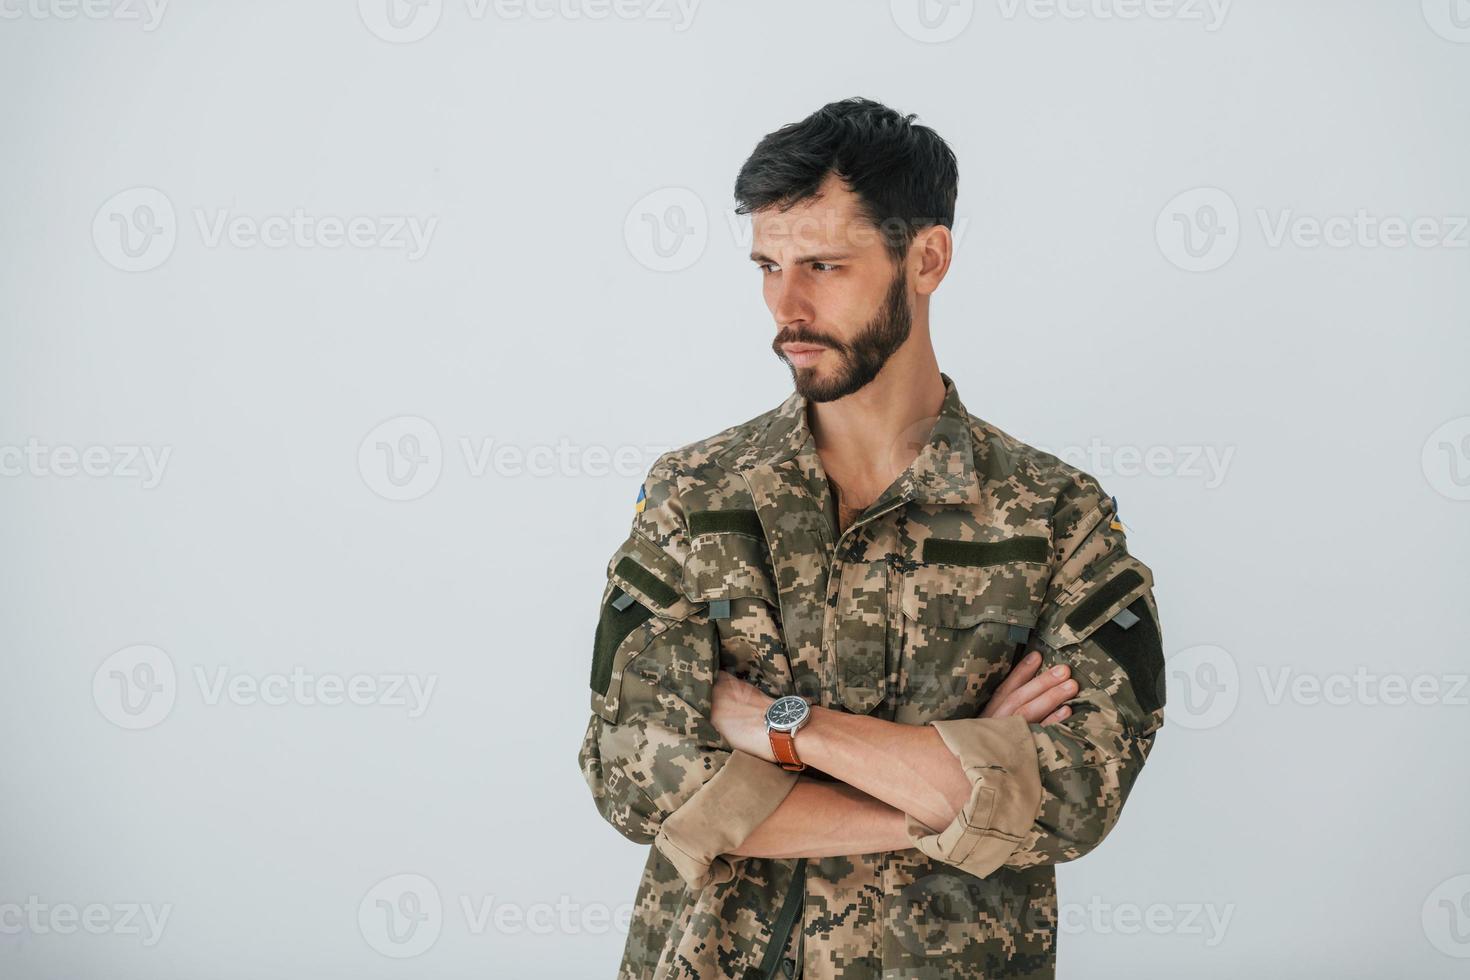 Soldier in uniform is standing indoors against white wall photo